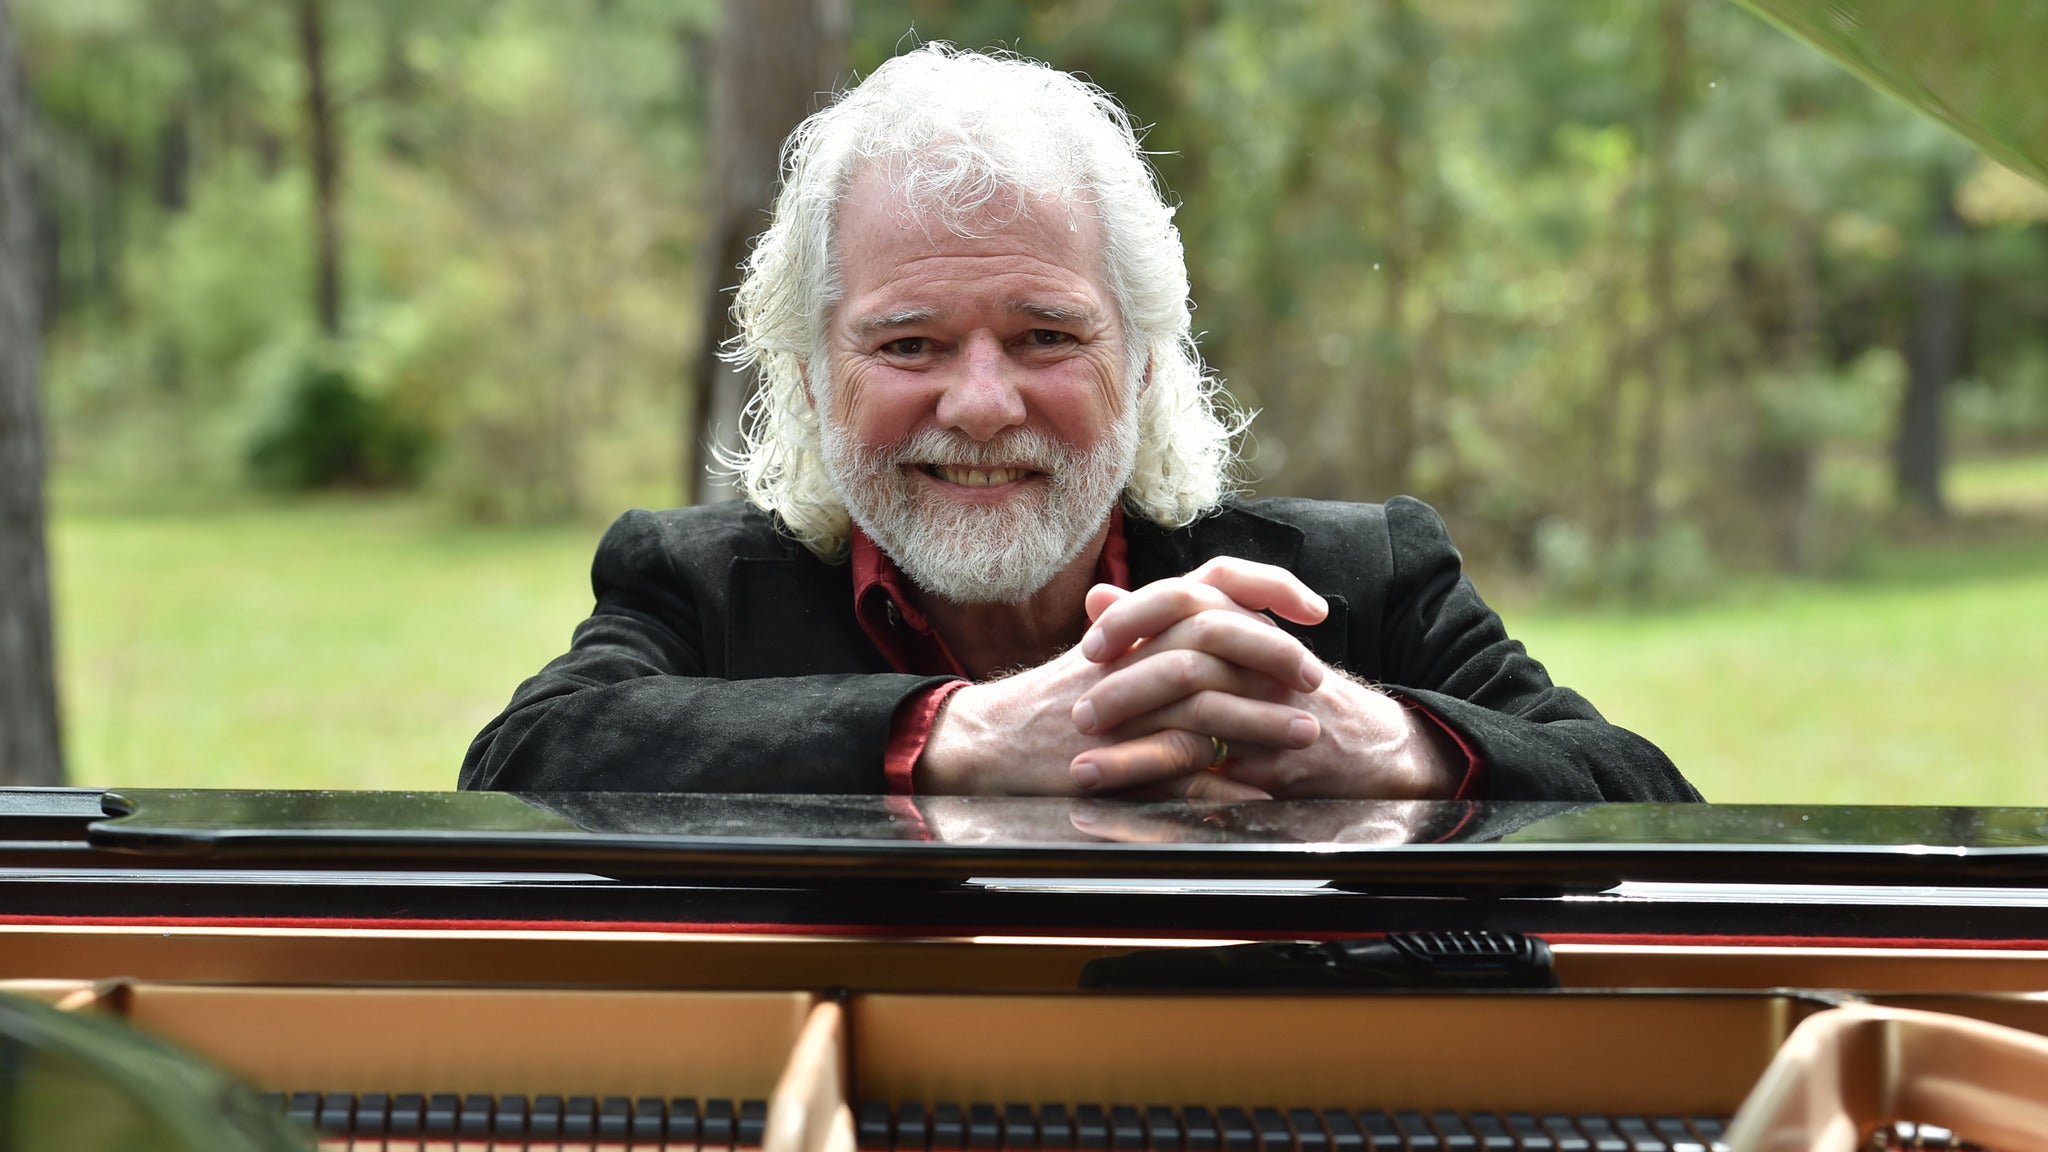 Chuck Leavell and his Big Band in New York promo photo for Citi® Cardmember Preferred presale offer code